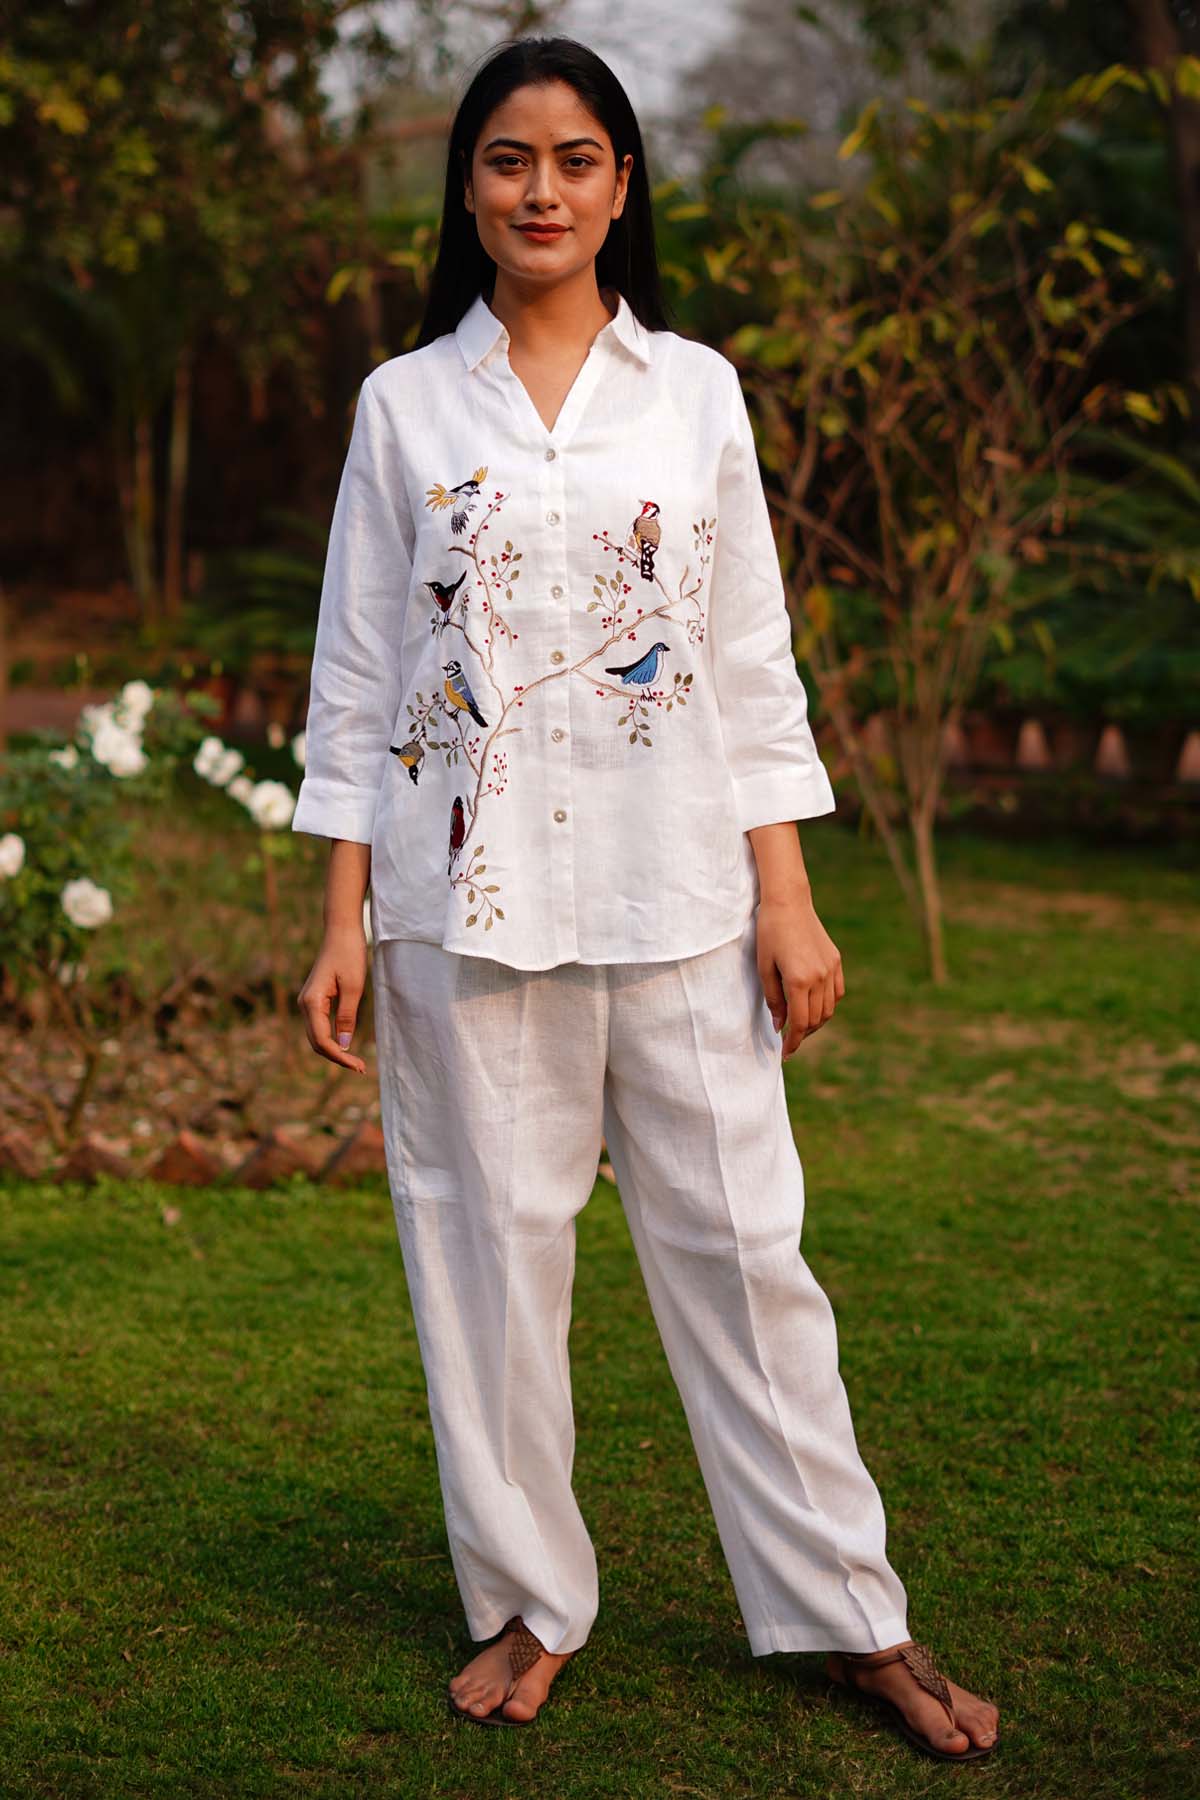 Designer Linen Bloom White Linen Top with Delicate Bird Embroidery For Women Online at ScrollnShops